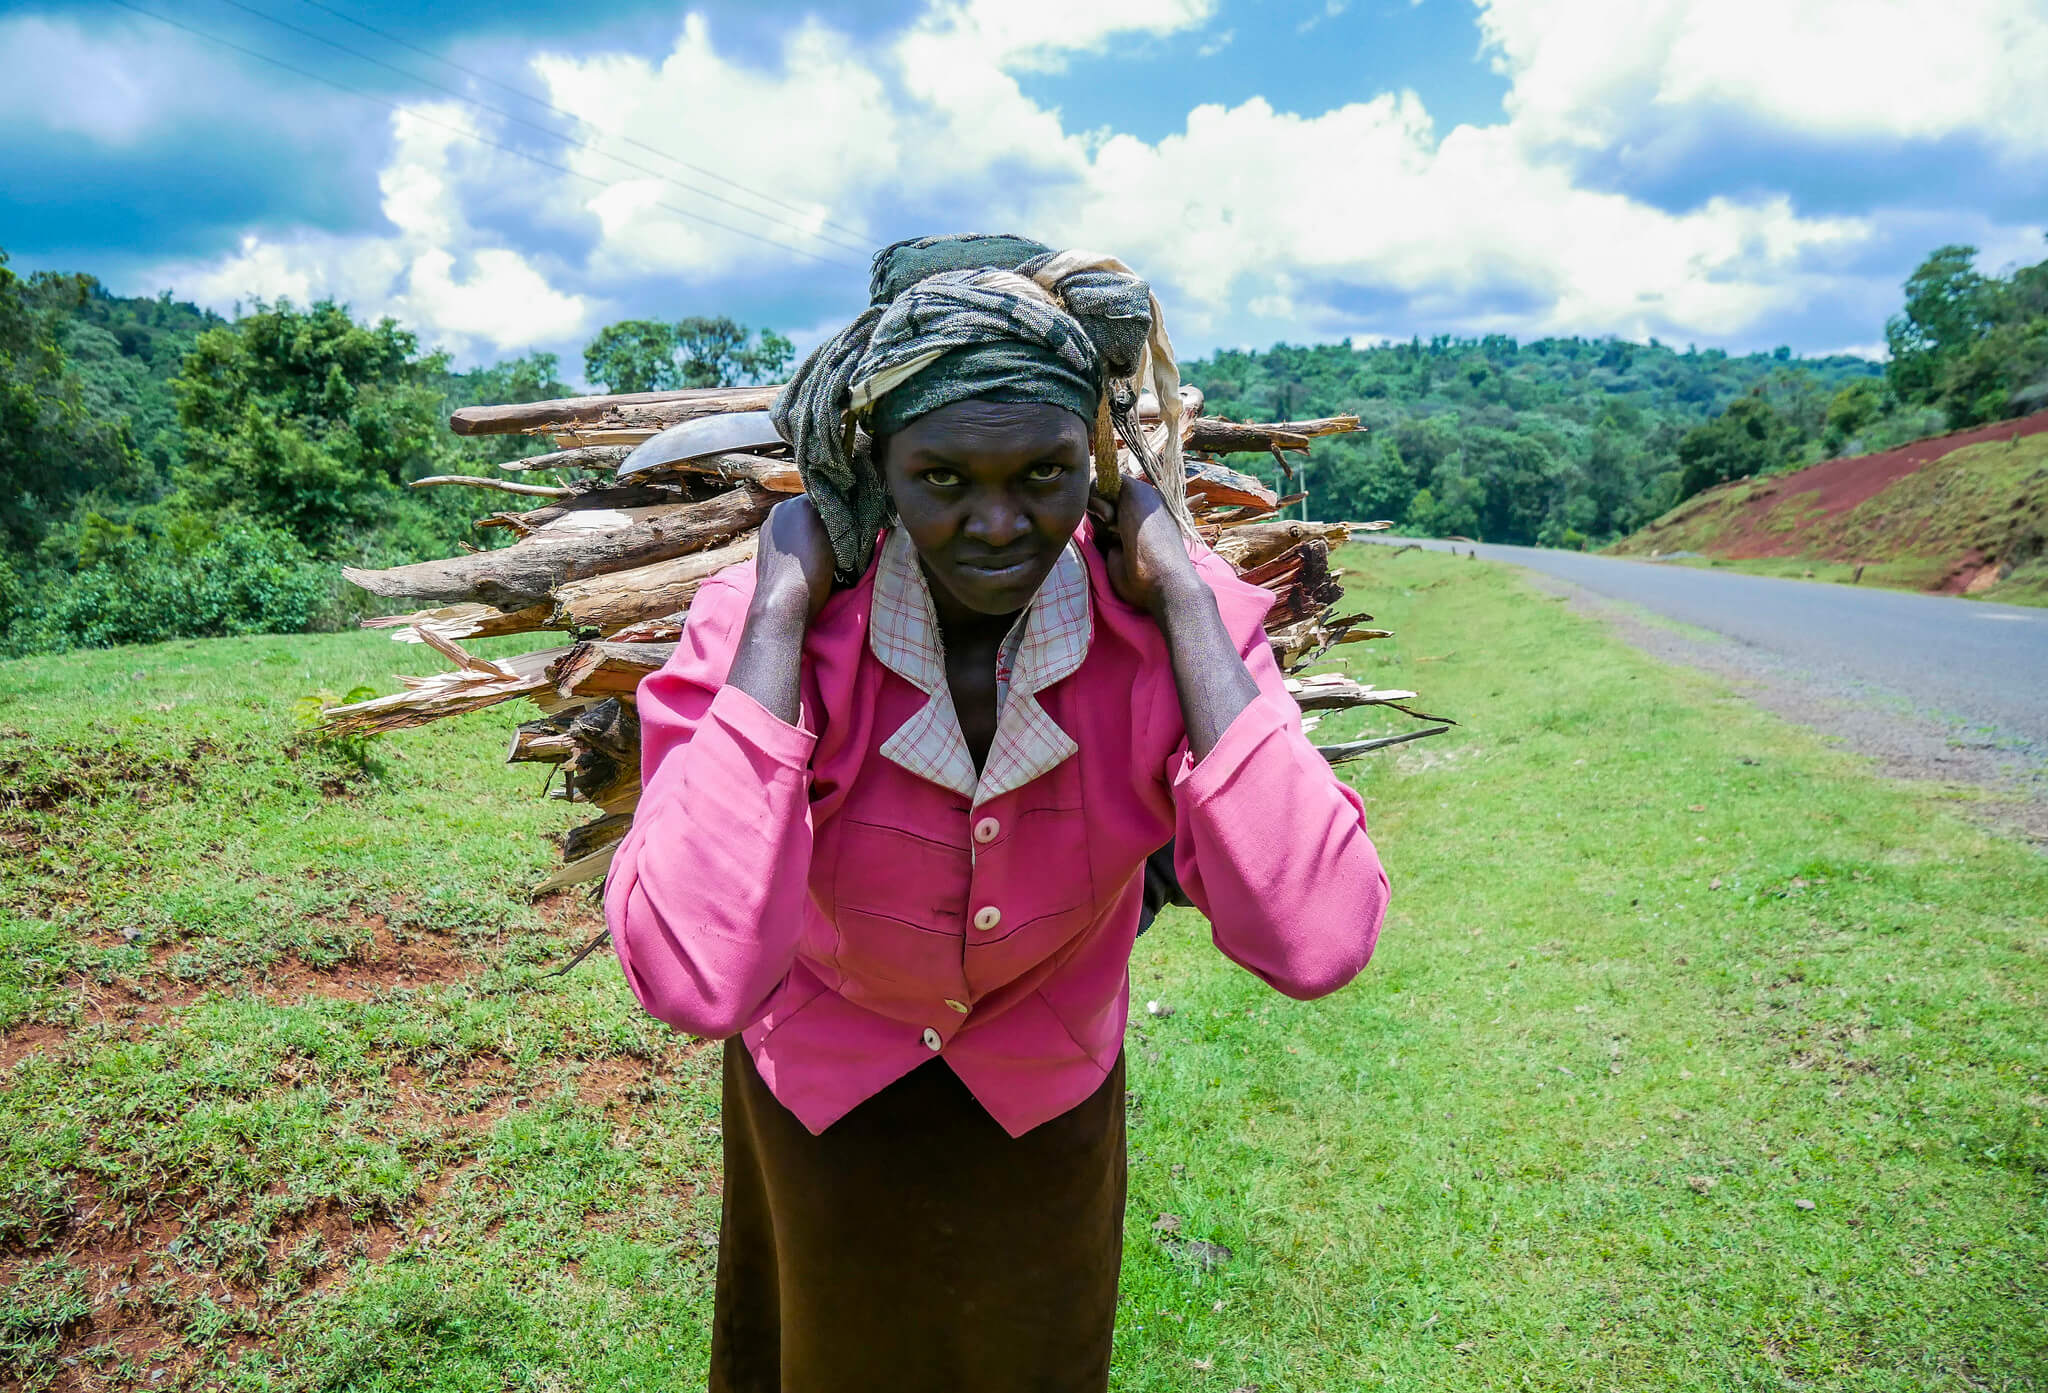 Sharon Rotich has the user right to gather fire wood from the forest.